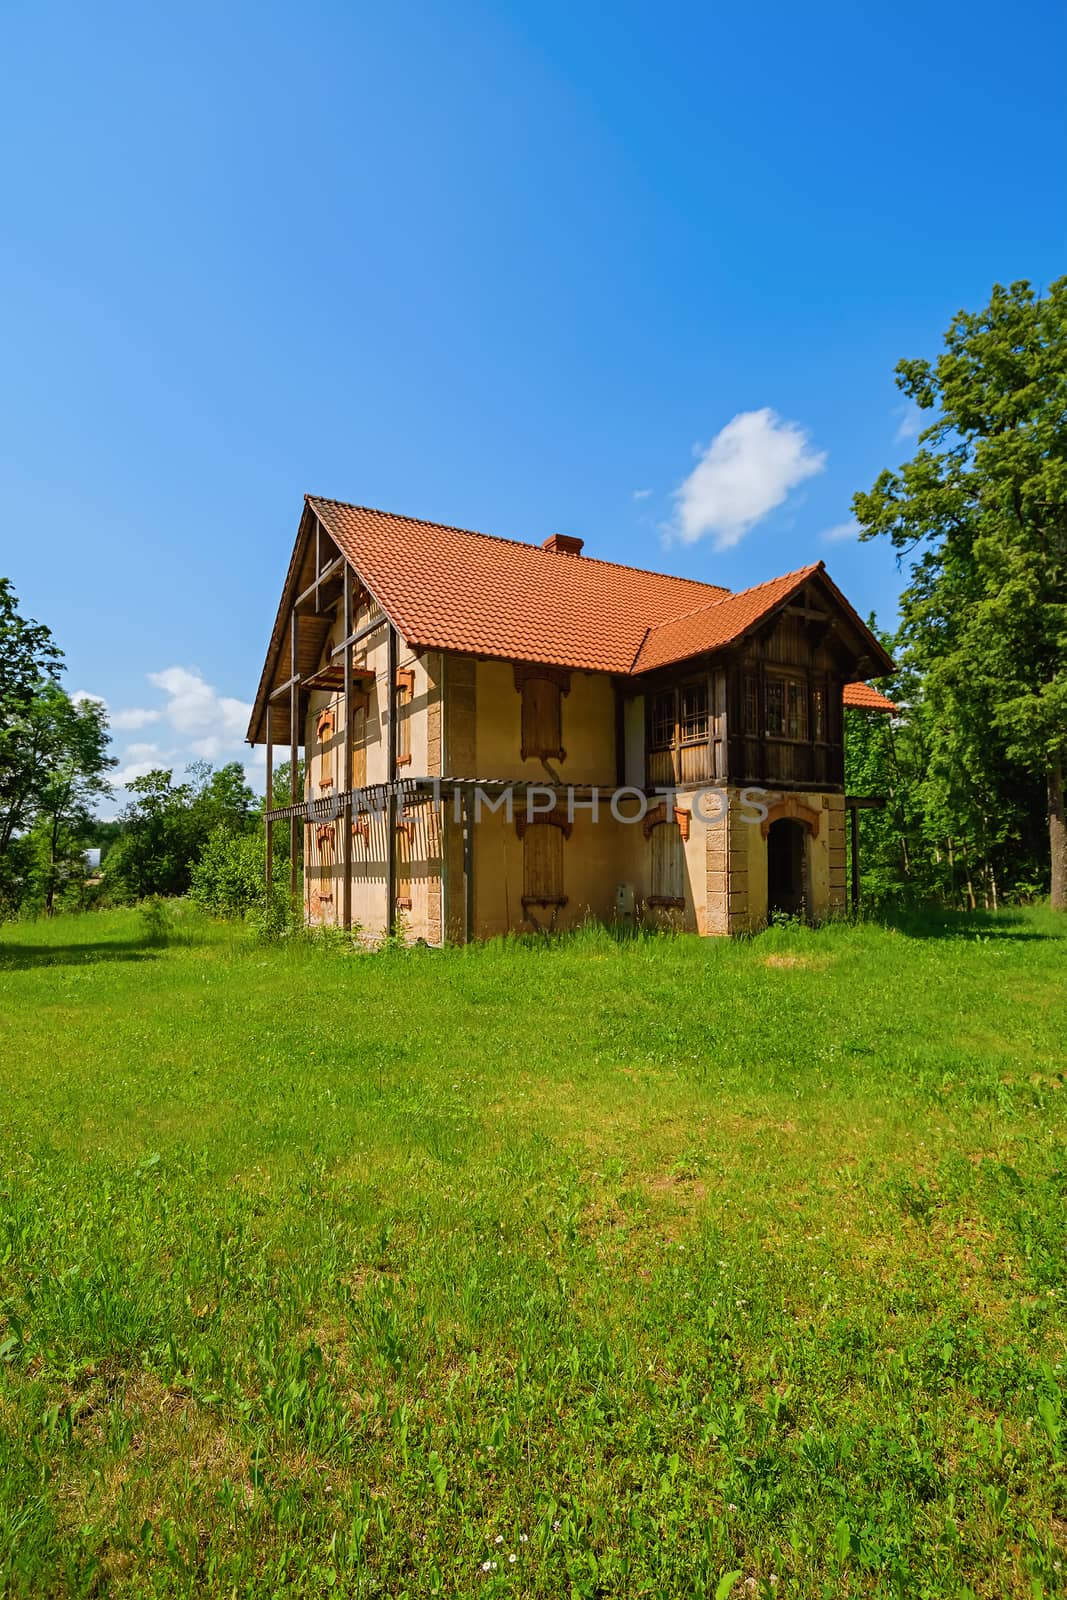 Abandoned old house in the countryside